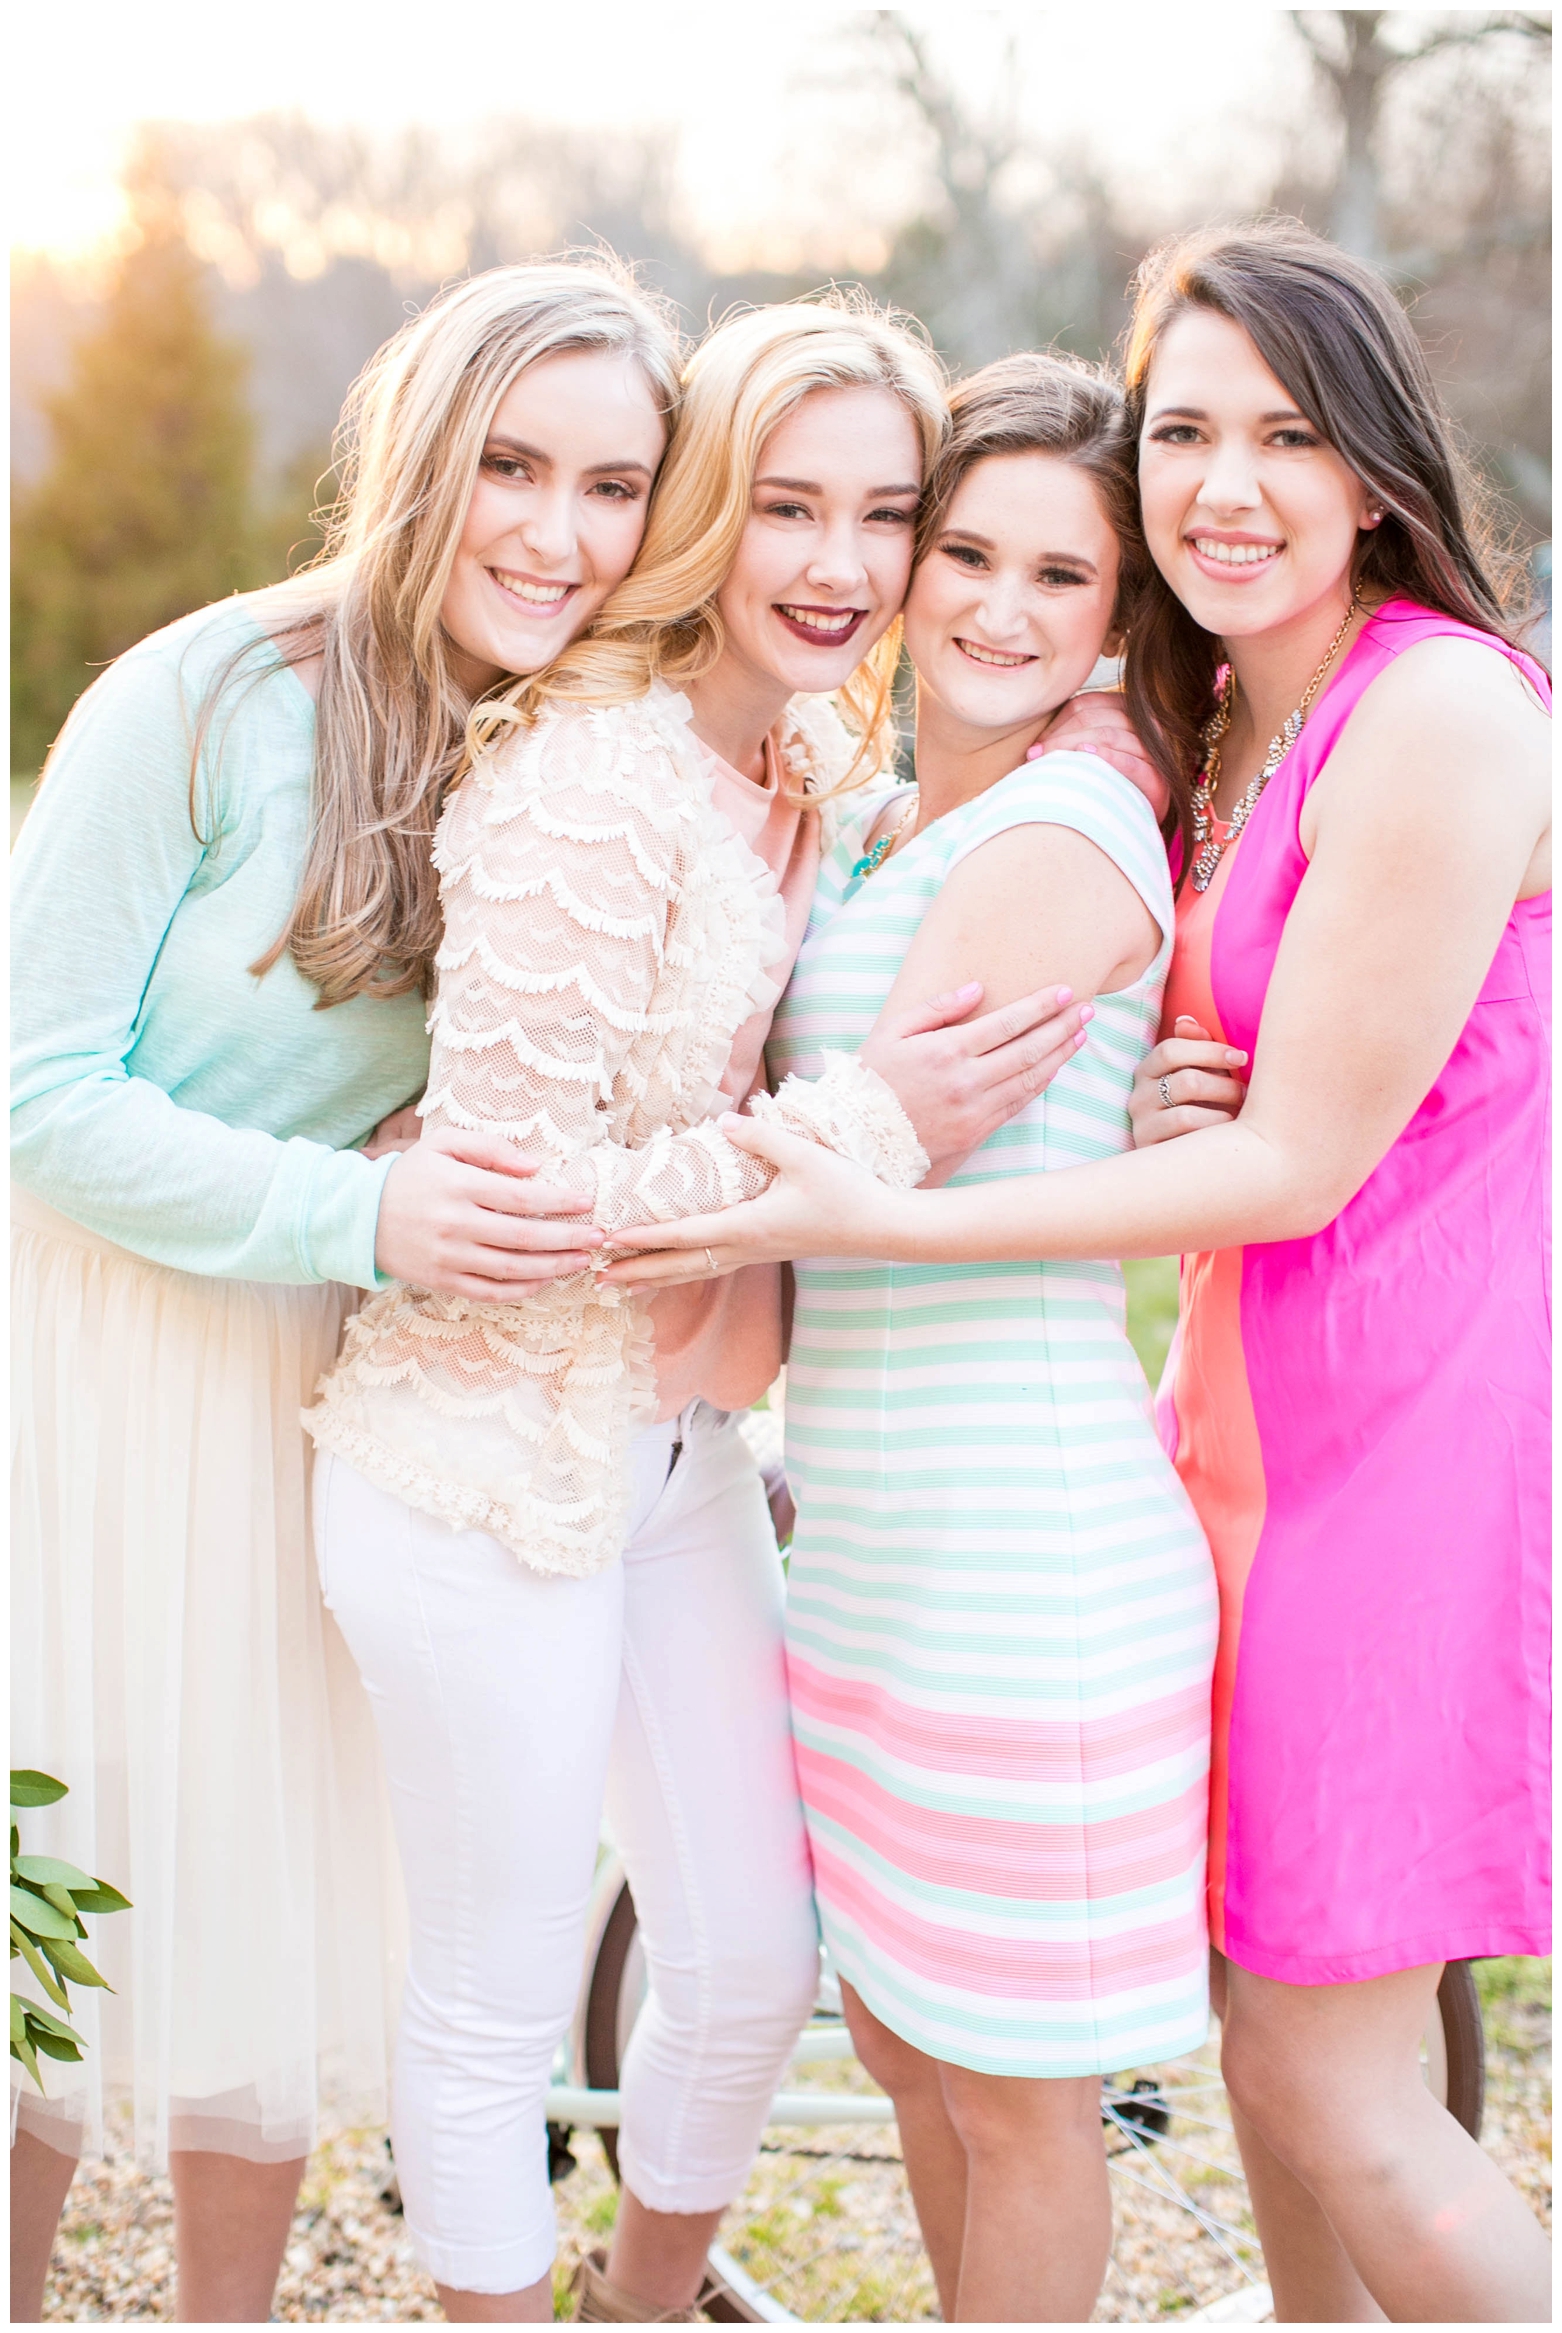 View More: http://hopetaylorphotographyphotos.pass.us/march-2016-styled-shoot